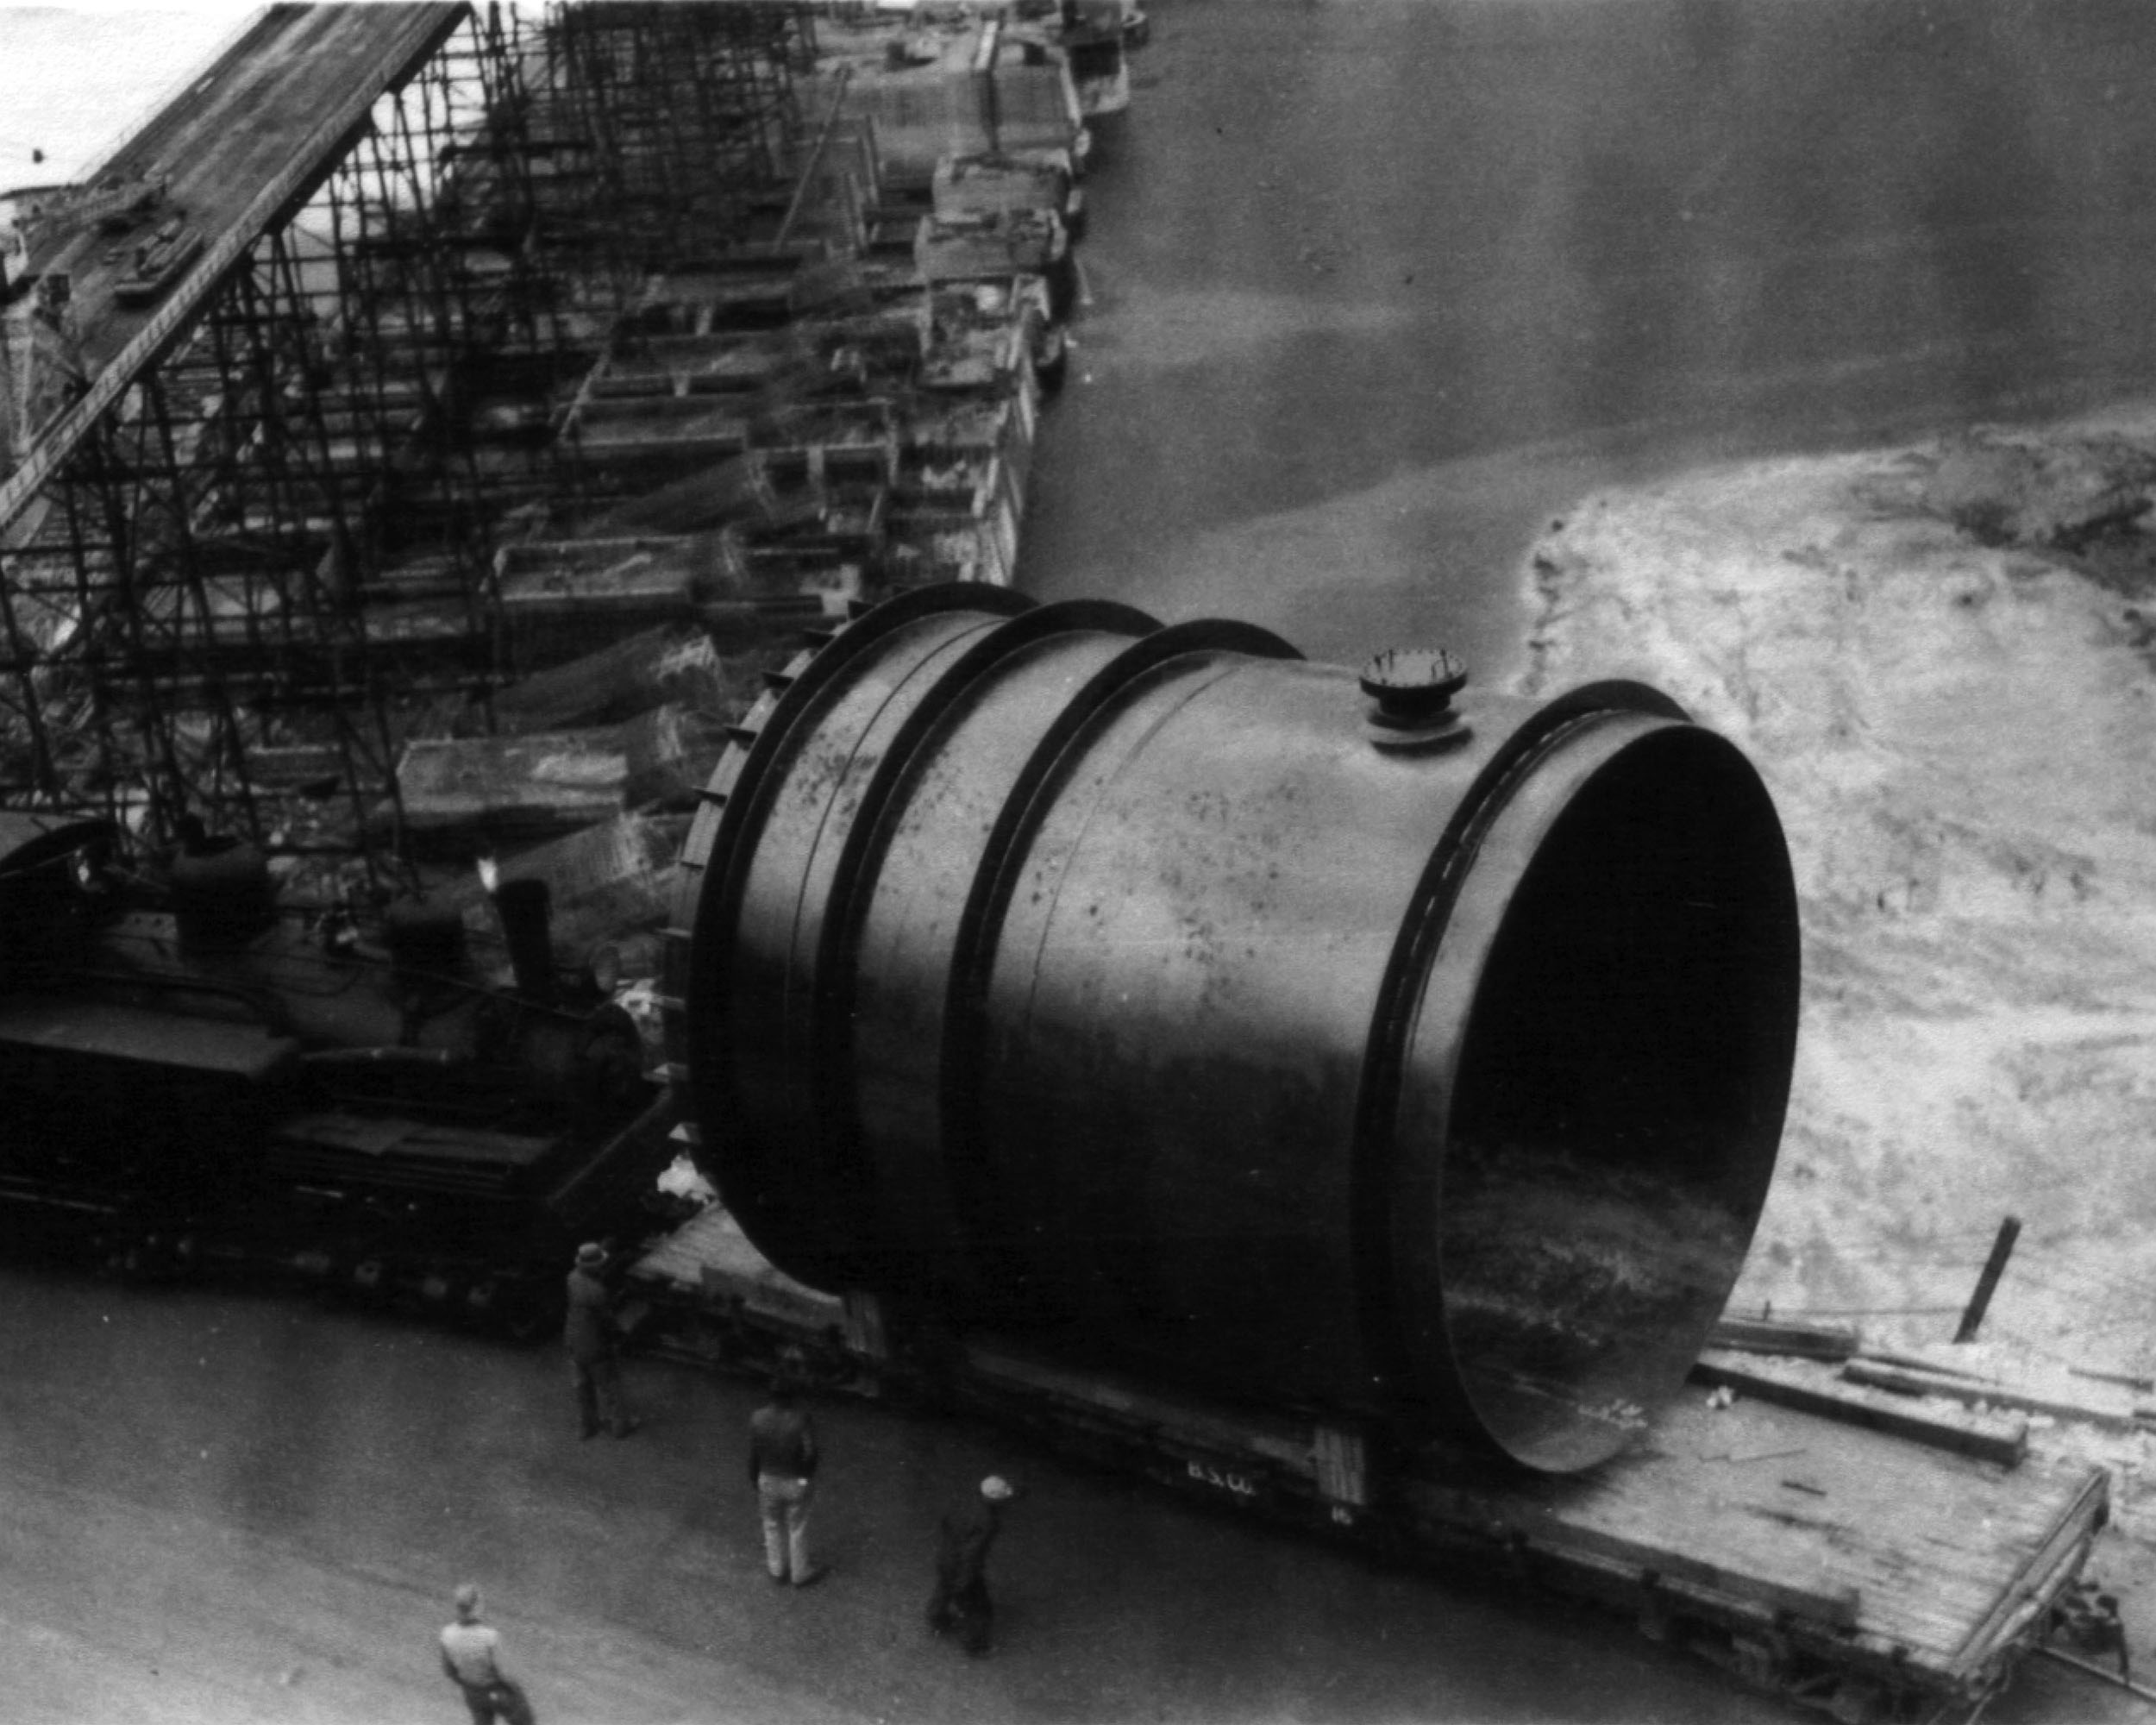 Photo taken October 12, 1938. An 18 ft. diameter penstock section brought by train from the fabricating plant in Electric City to Grand Coulee Dam.